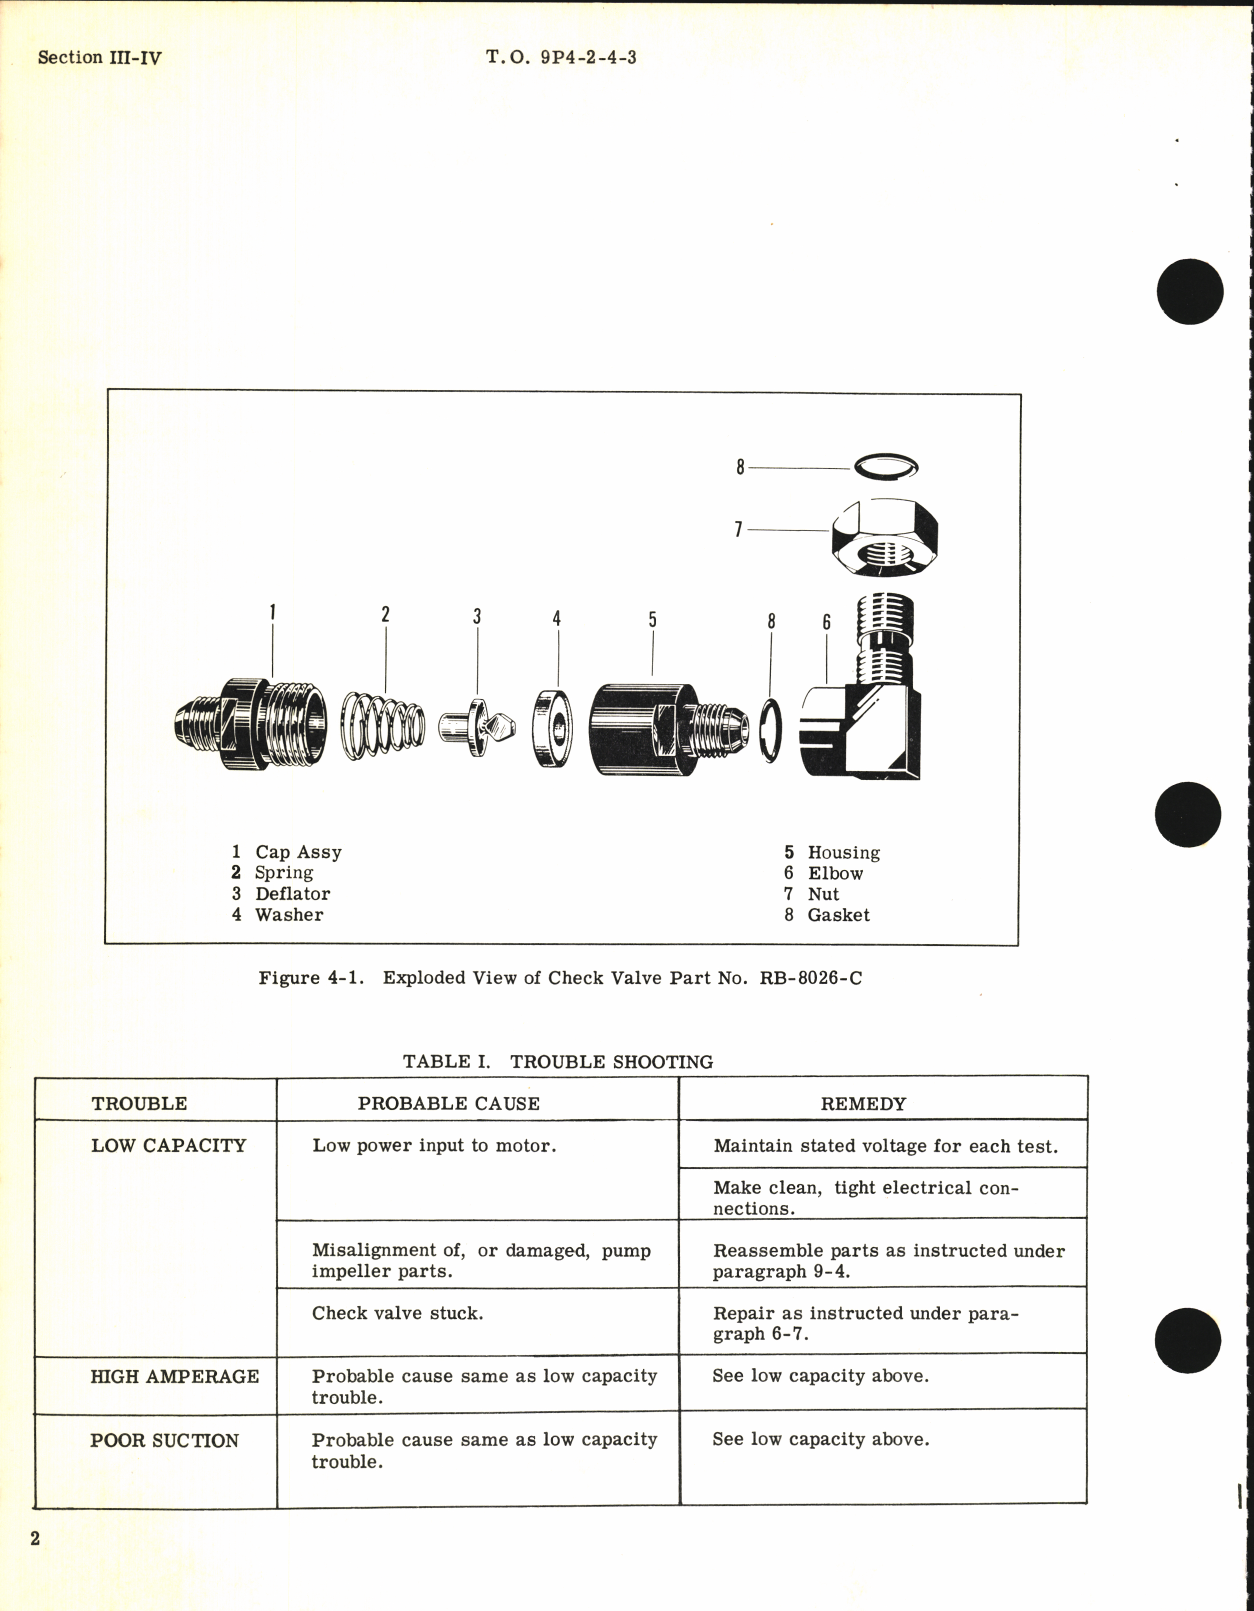 Sample page 6 from AirCorps Library document: Handbook of Overhaul Instructions for Oil-Free Air Pressure Pump Model RG-8160-1B